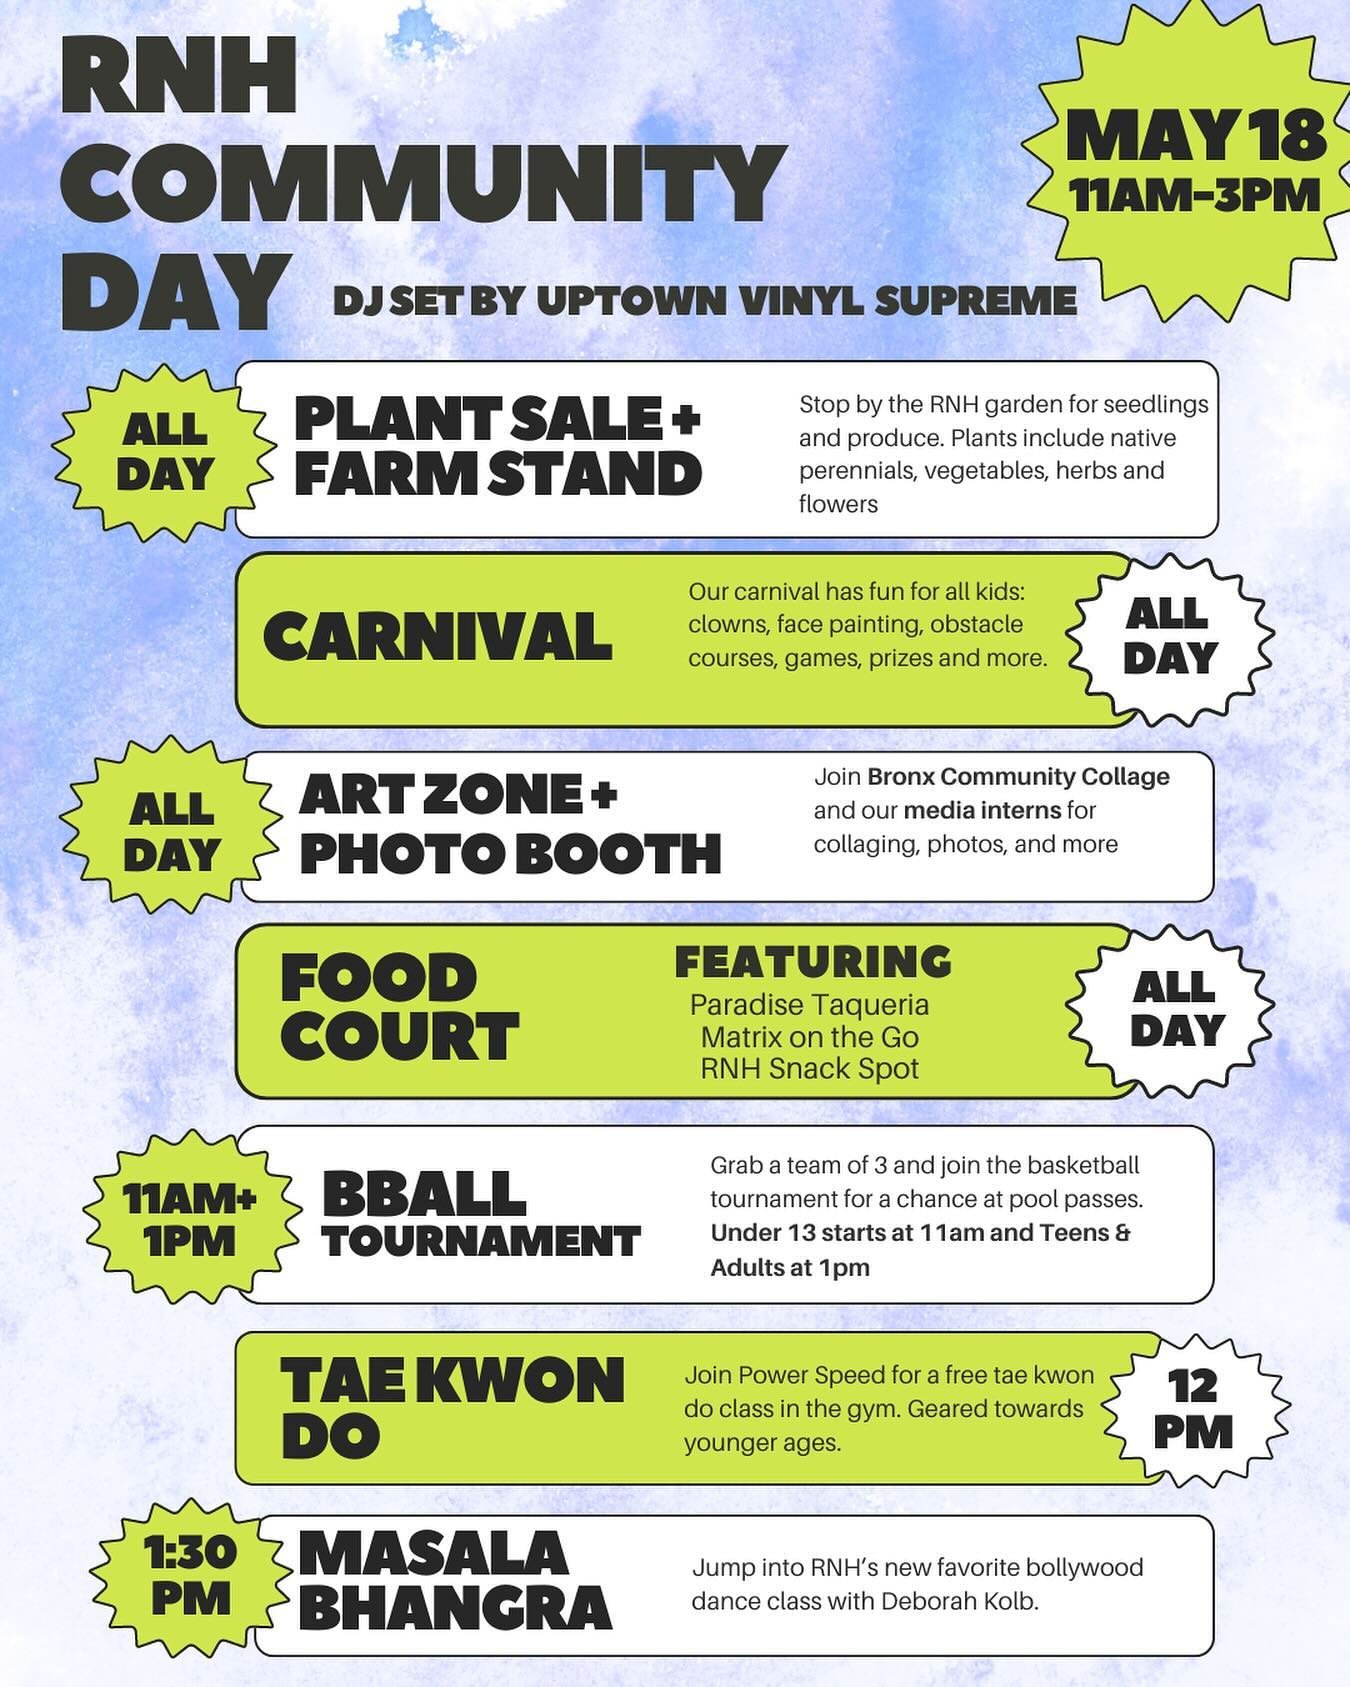 Just six days until Community Day 🌻🎨🎉
From Bollywood dancing to basketball tournaments, a carnival and plant sale, there is something for everyone.

Grab your neighbors and celebrate with us on May 18th